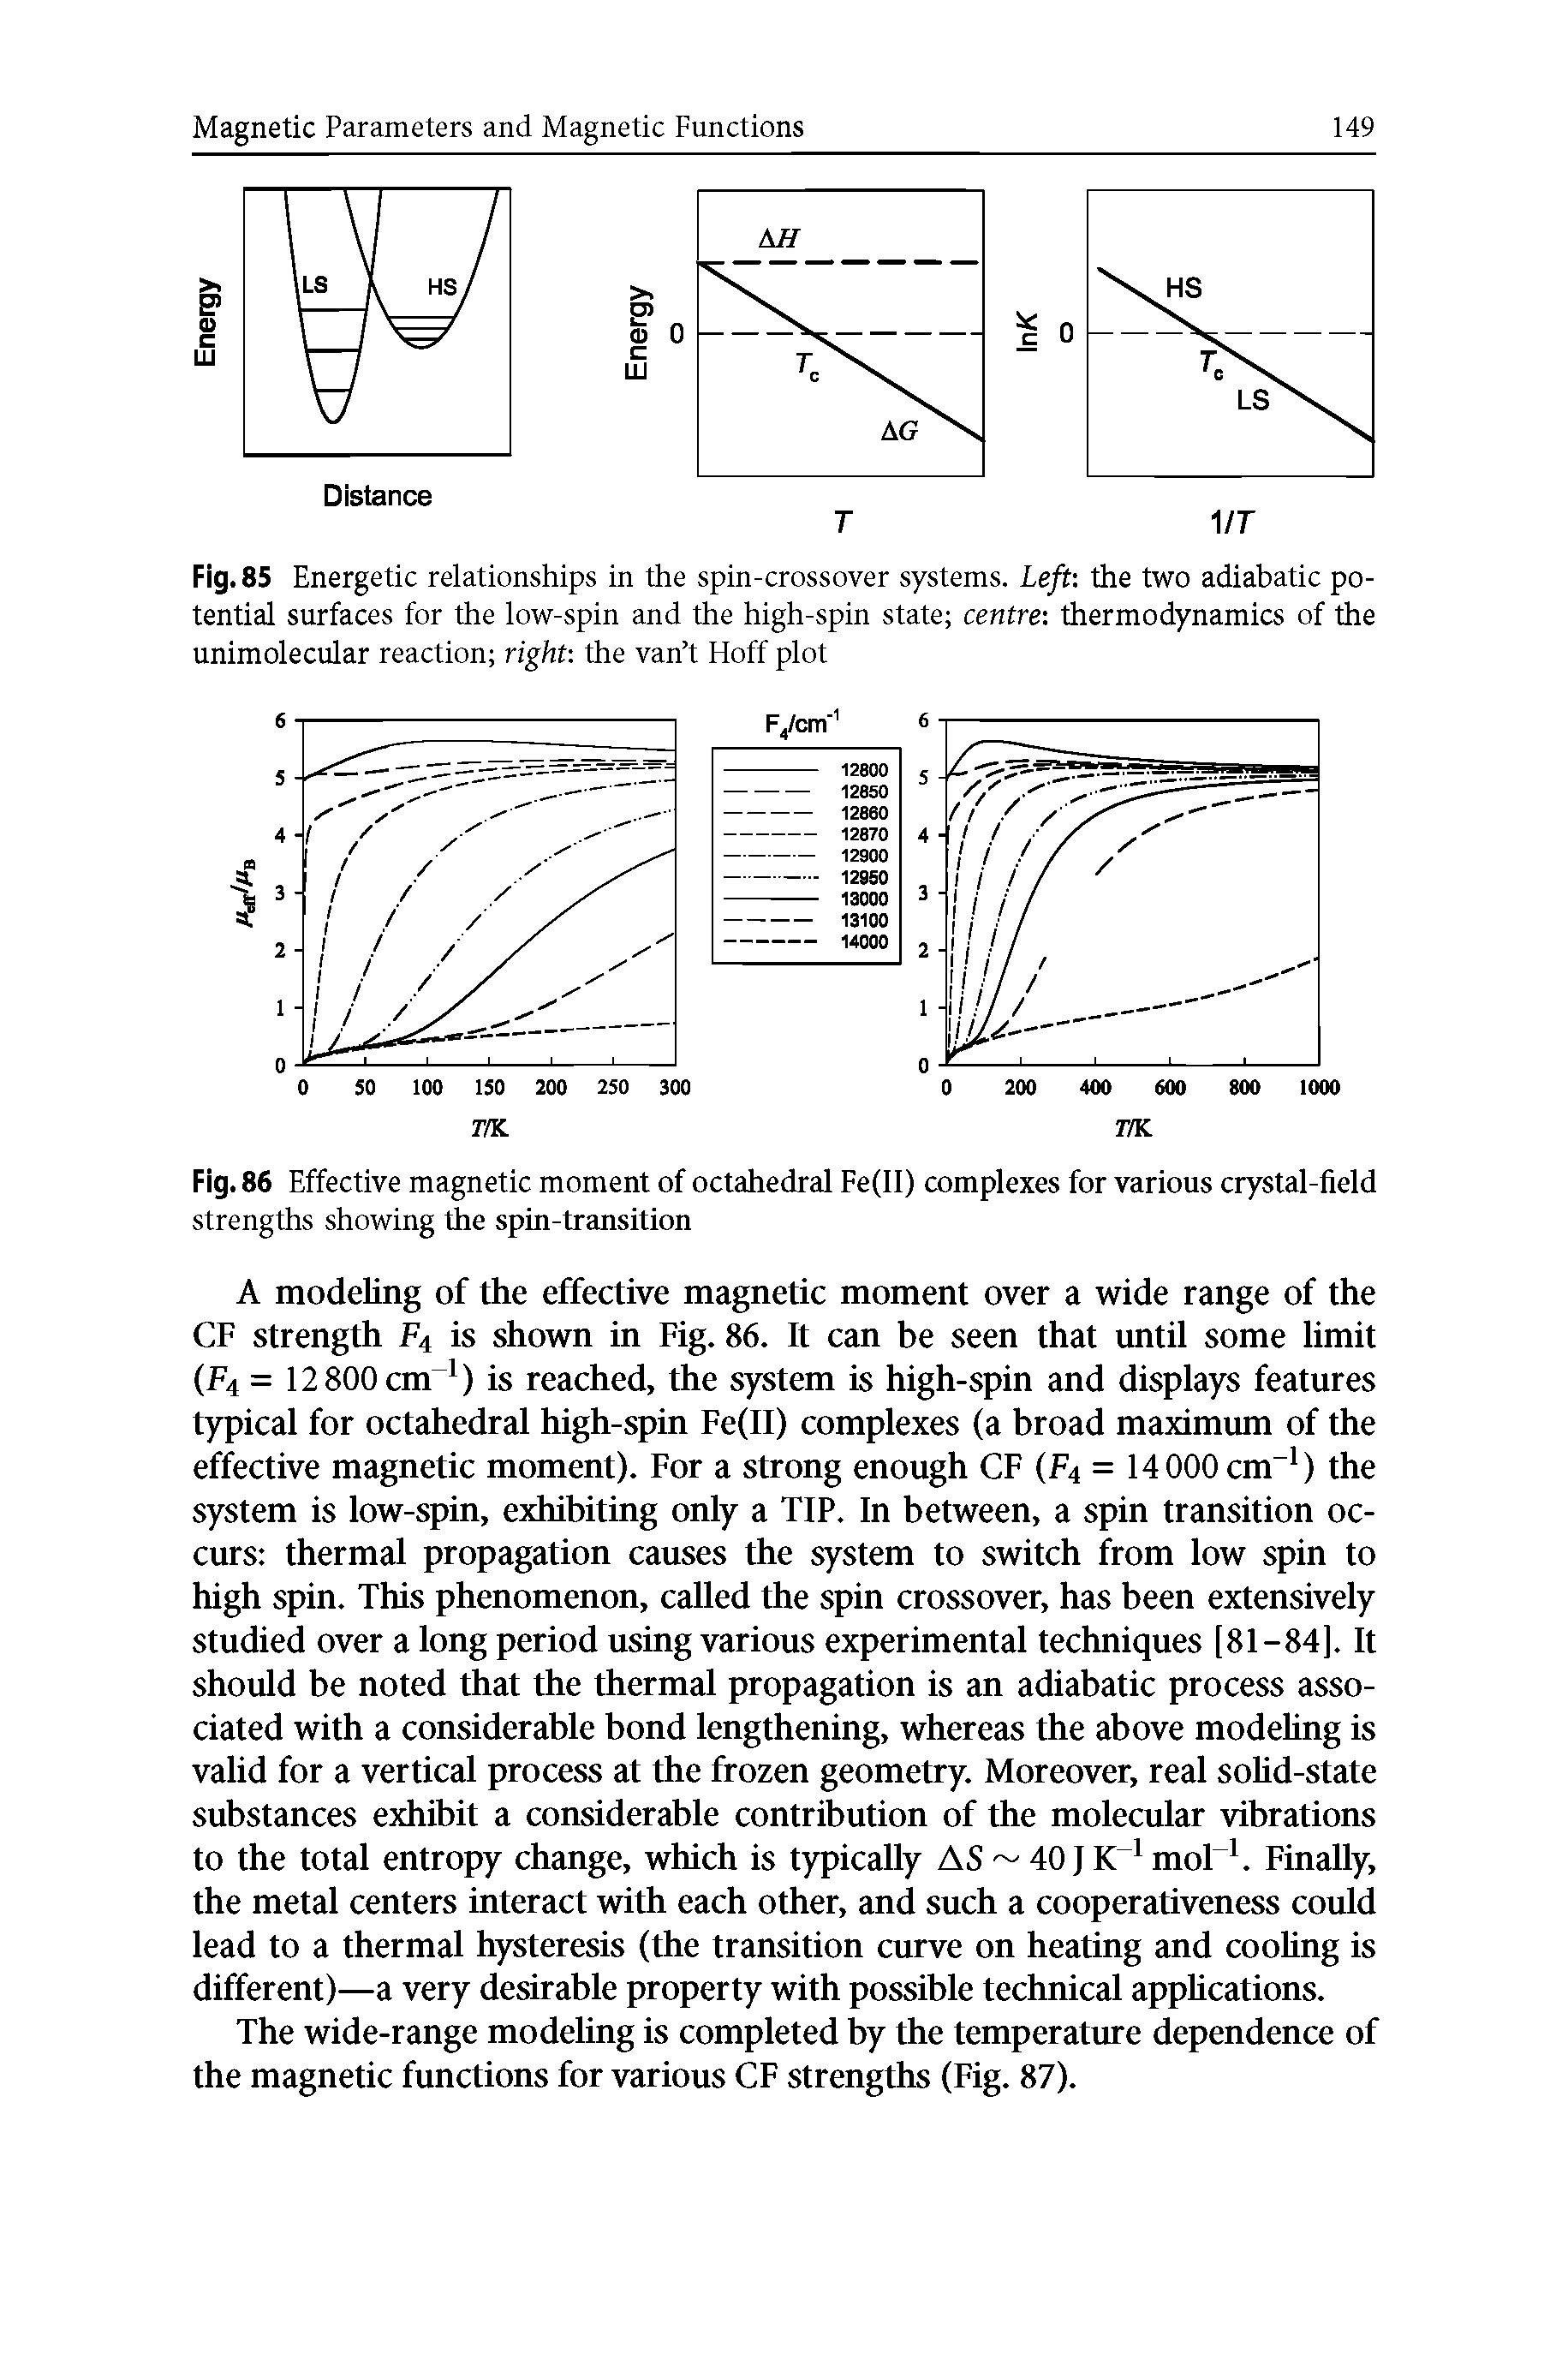 Fig. 85 Energetic relationships in the spin-crossover systems. Left-, the two adiabatic potential surfaces for the low-spin and the high-spin state centre thermodynamics of the unimolecular reaction right the van t Hoff plot...